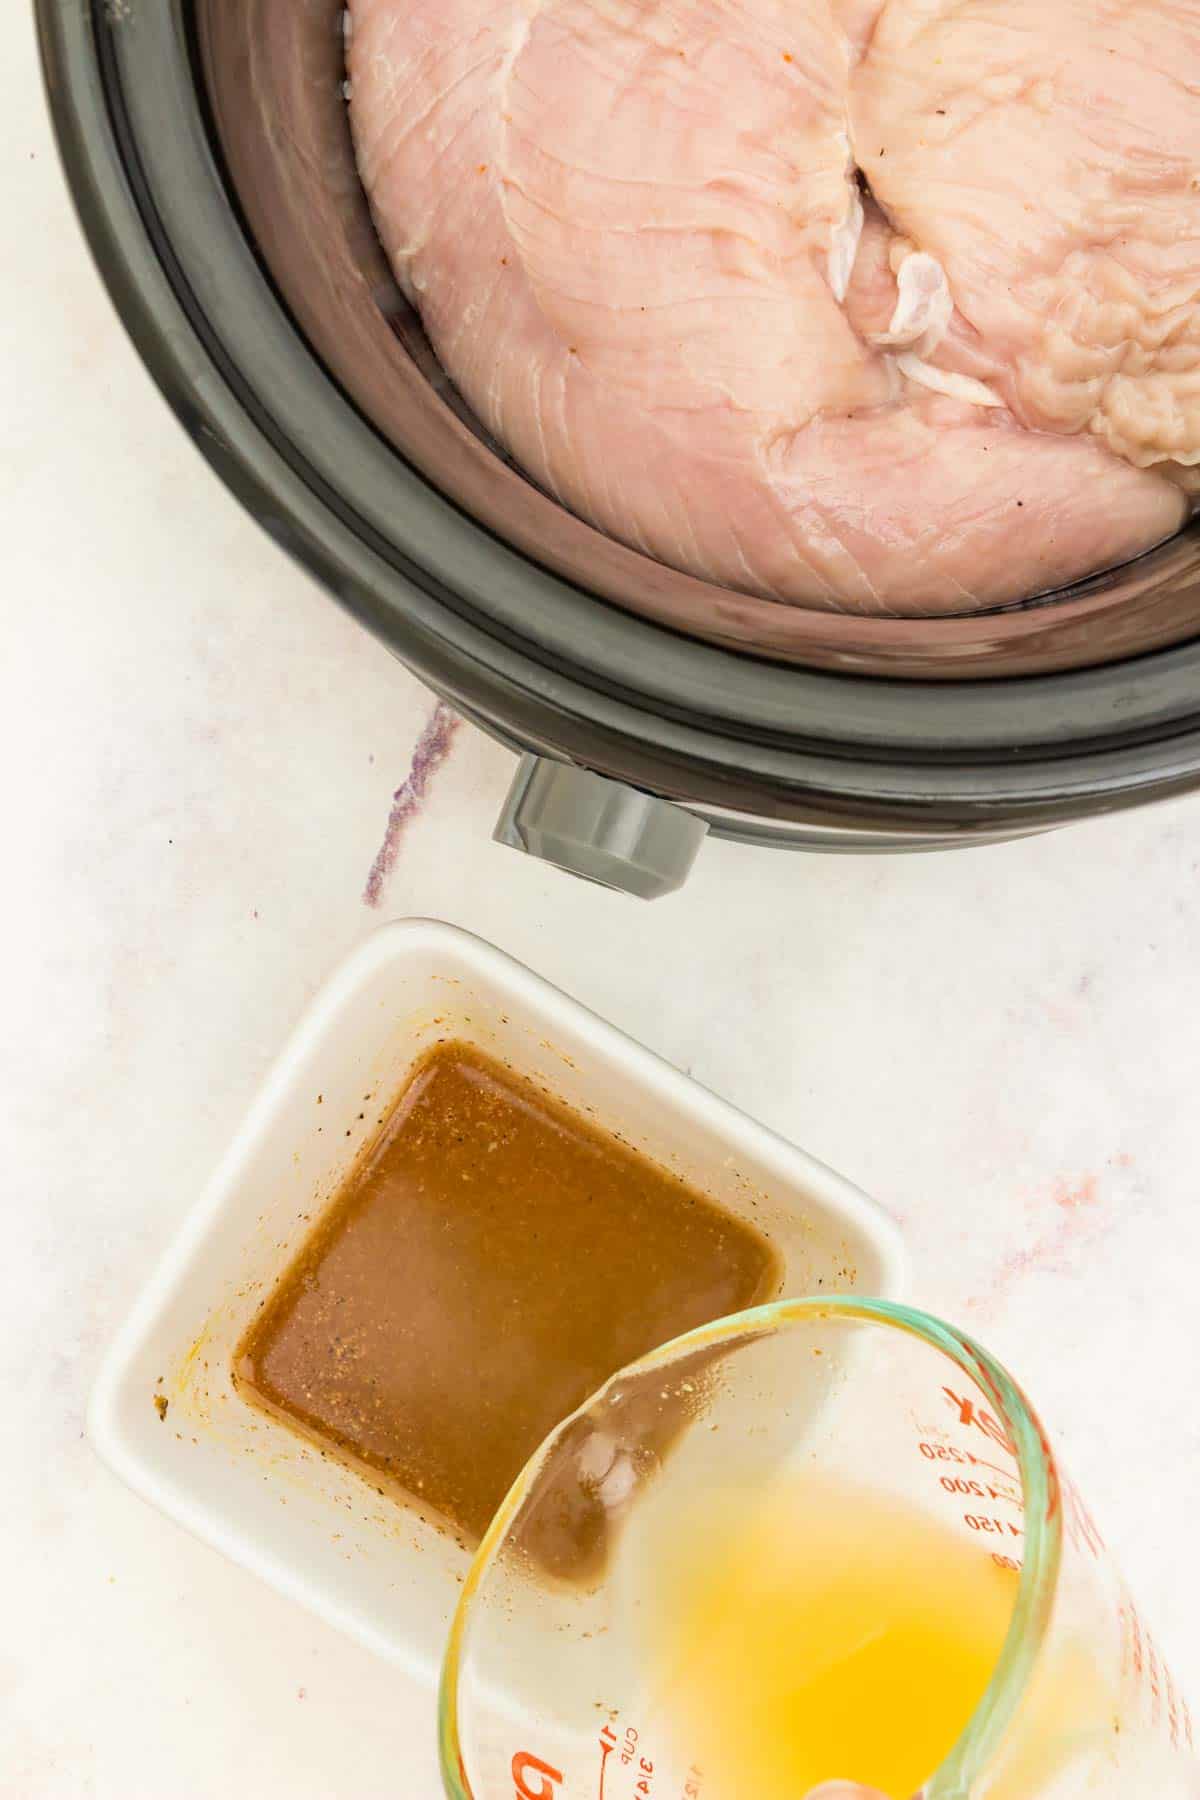 Chicken broth being poured into the bowl of sauce next to the crockpot with raw turkey tenderloins in it.